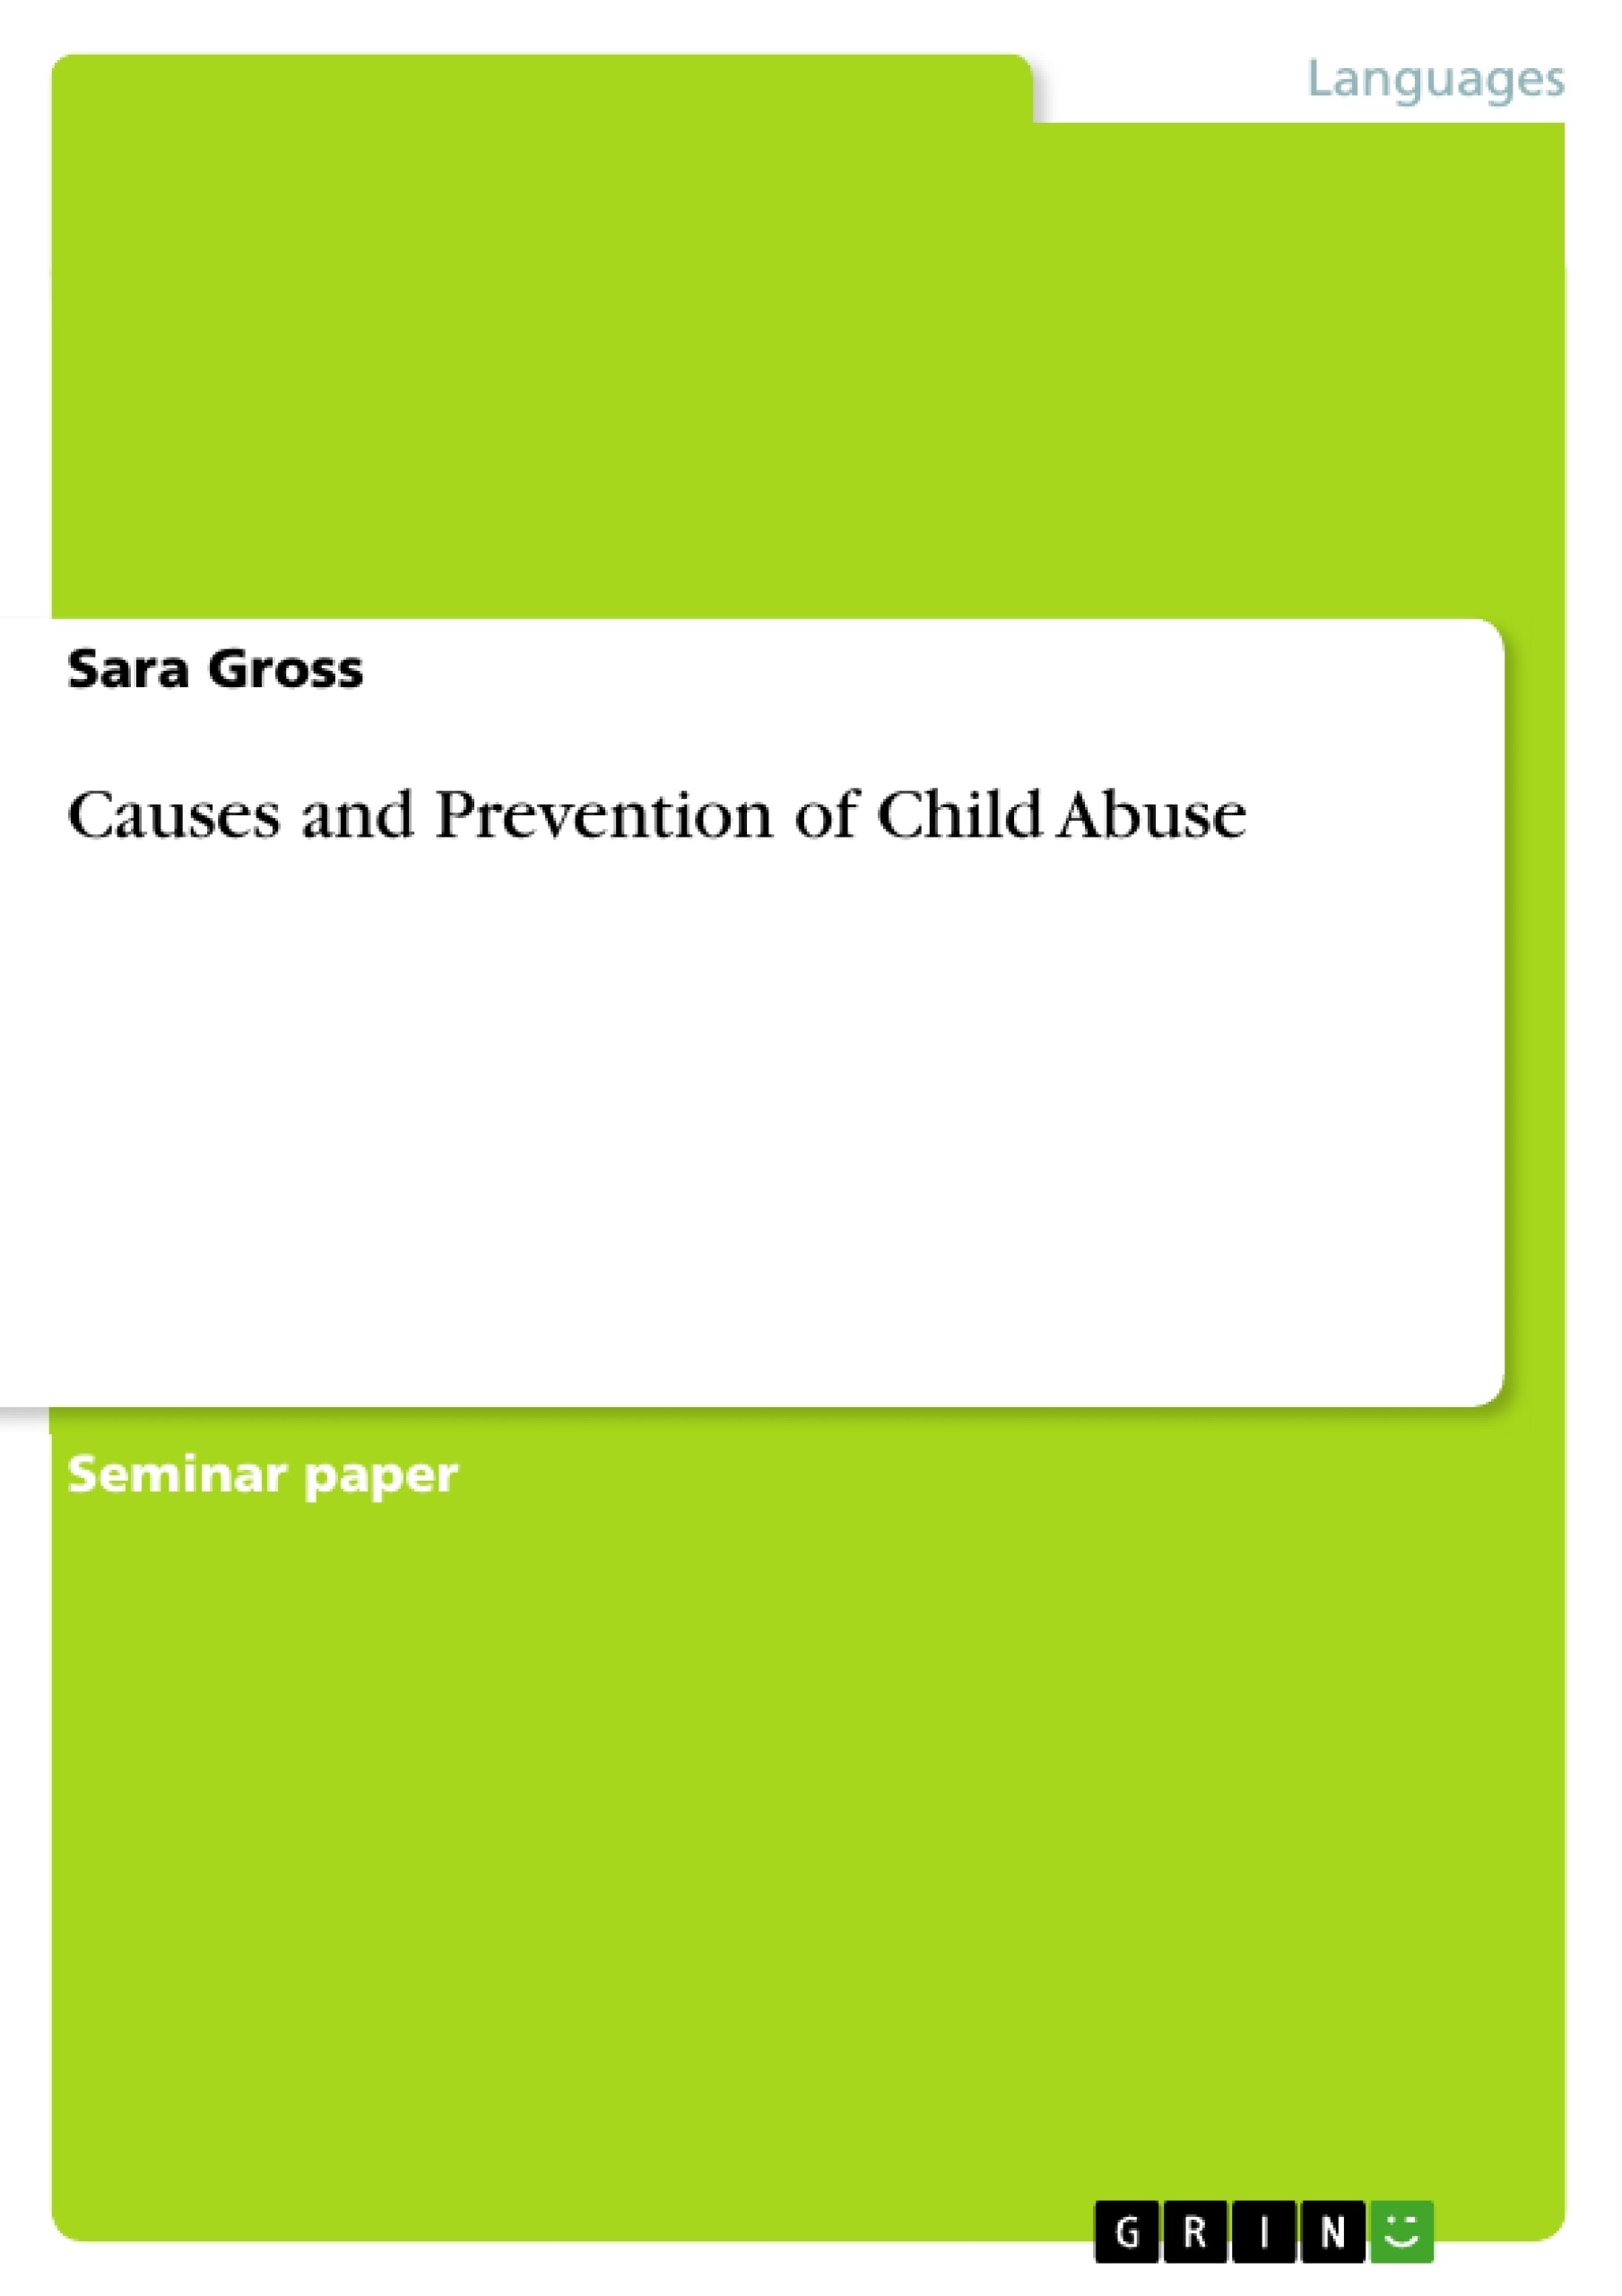 Title: Causes and Prevention of Child Abuse